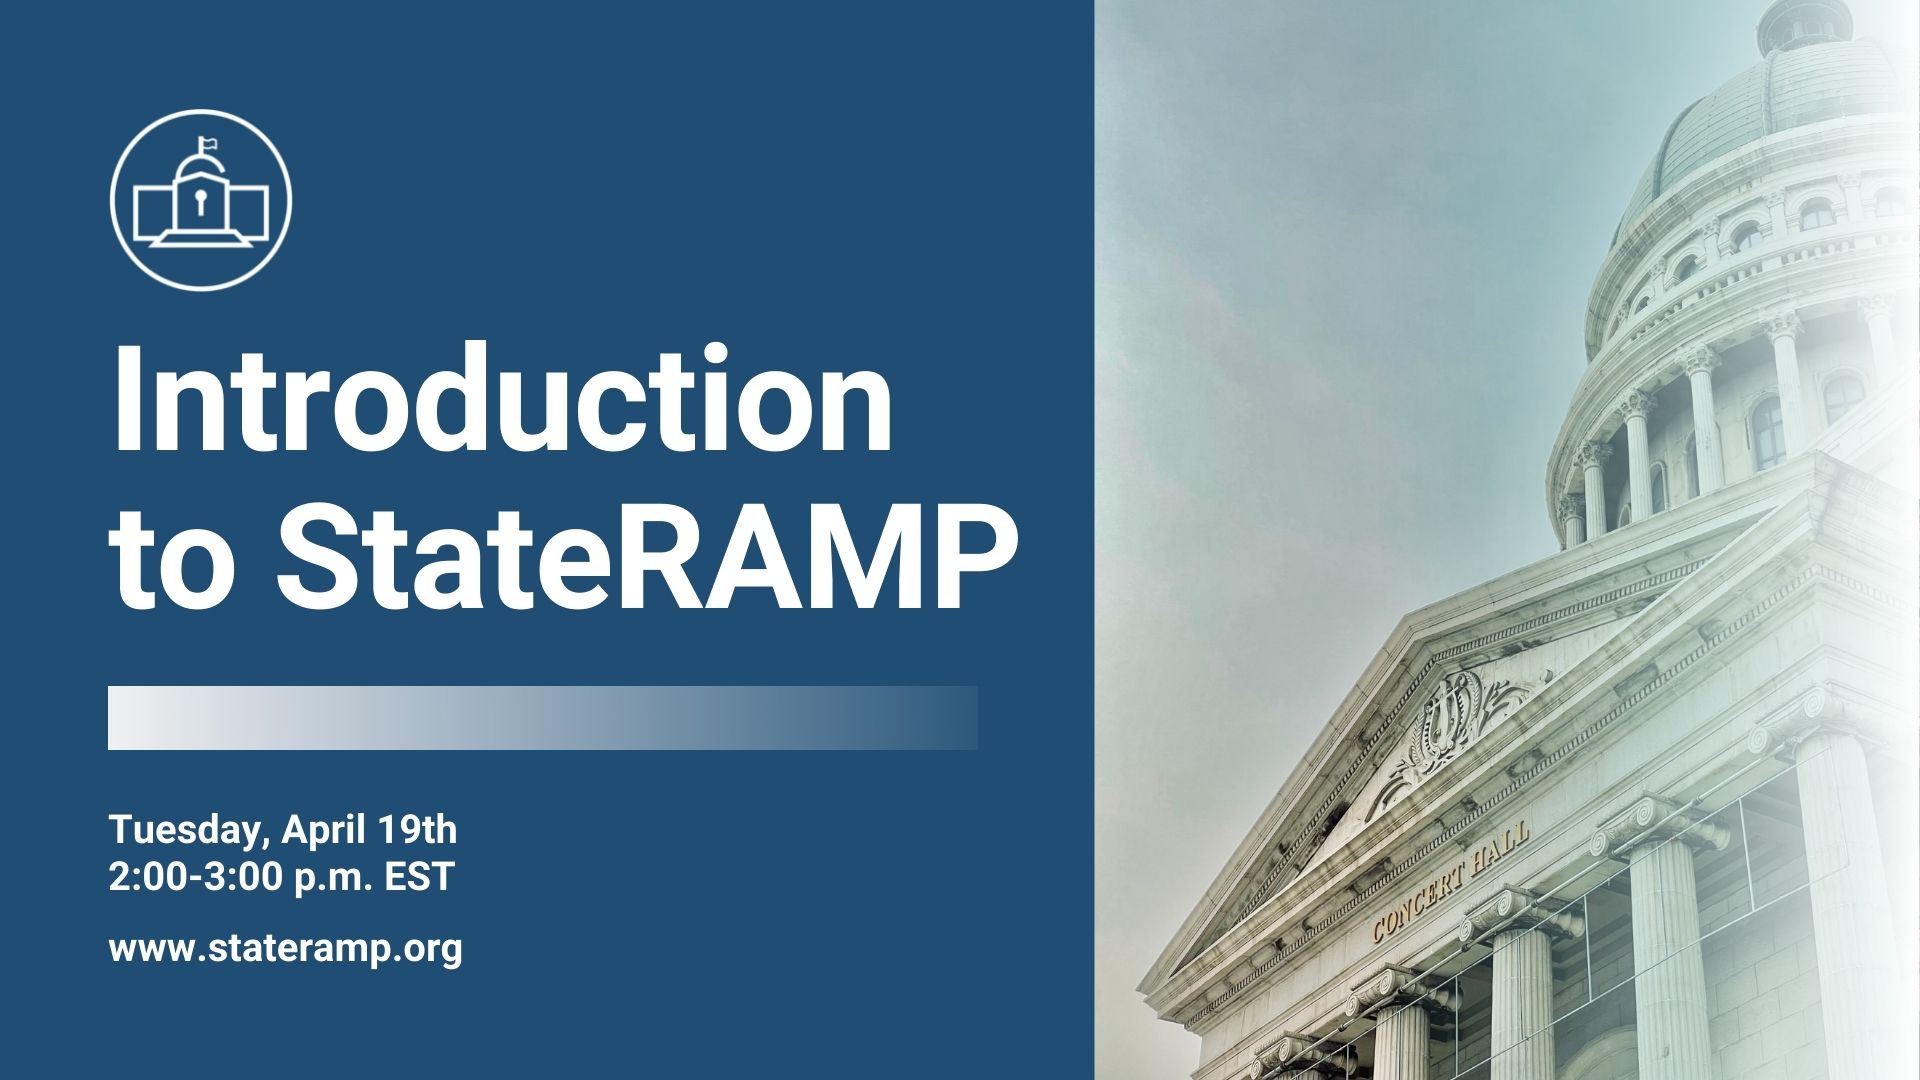 Register for the Introduction to StateRAMP webinar